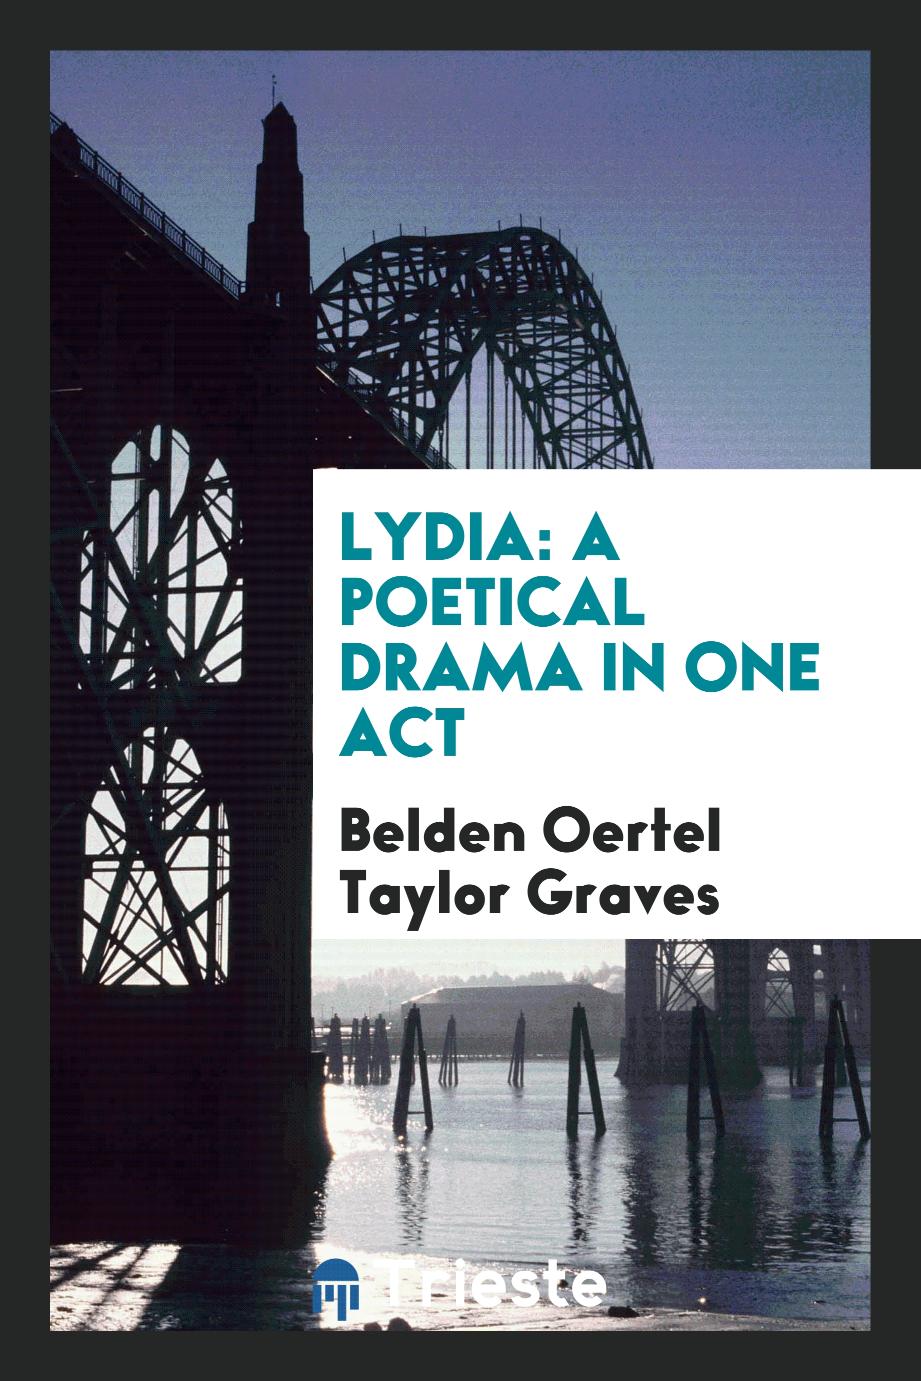 Lydia: A Poetical Drama in One Act